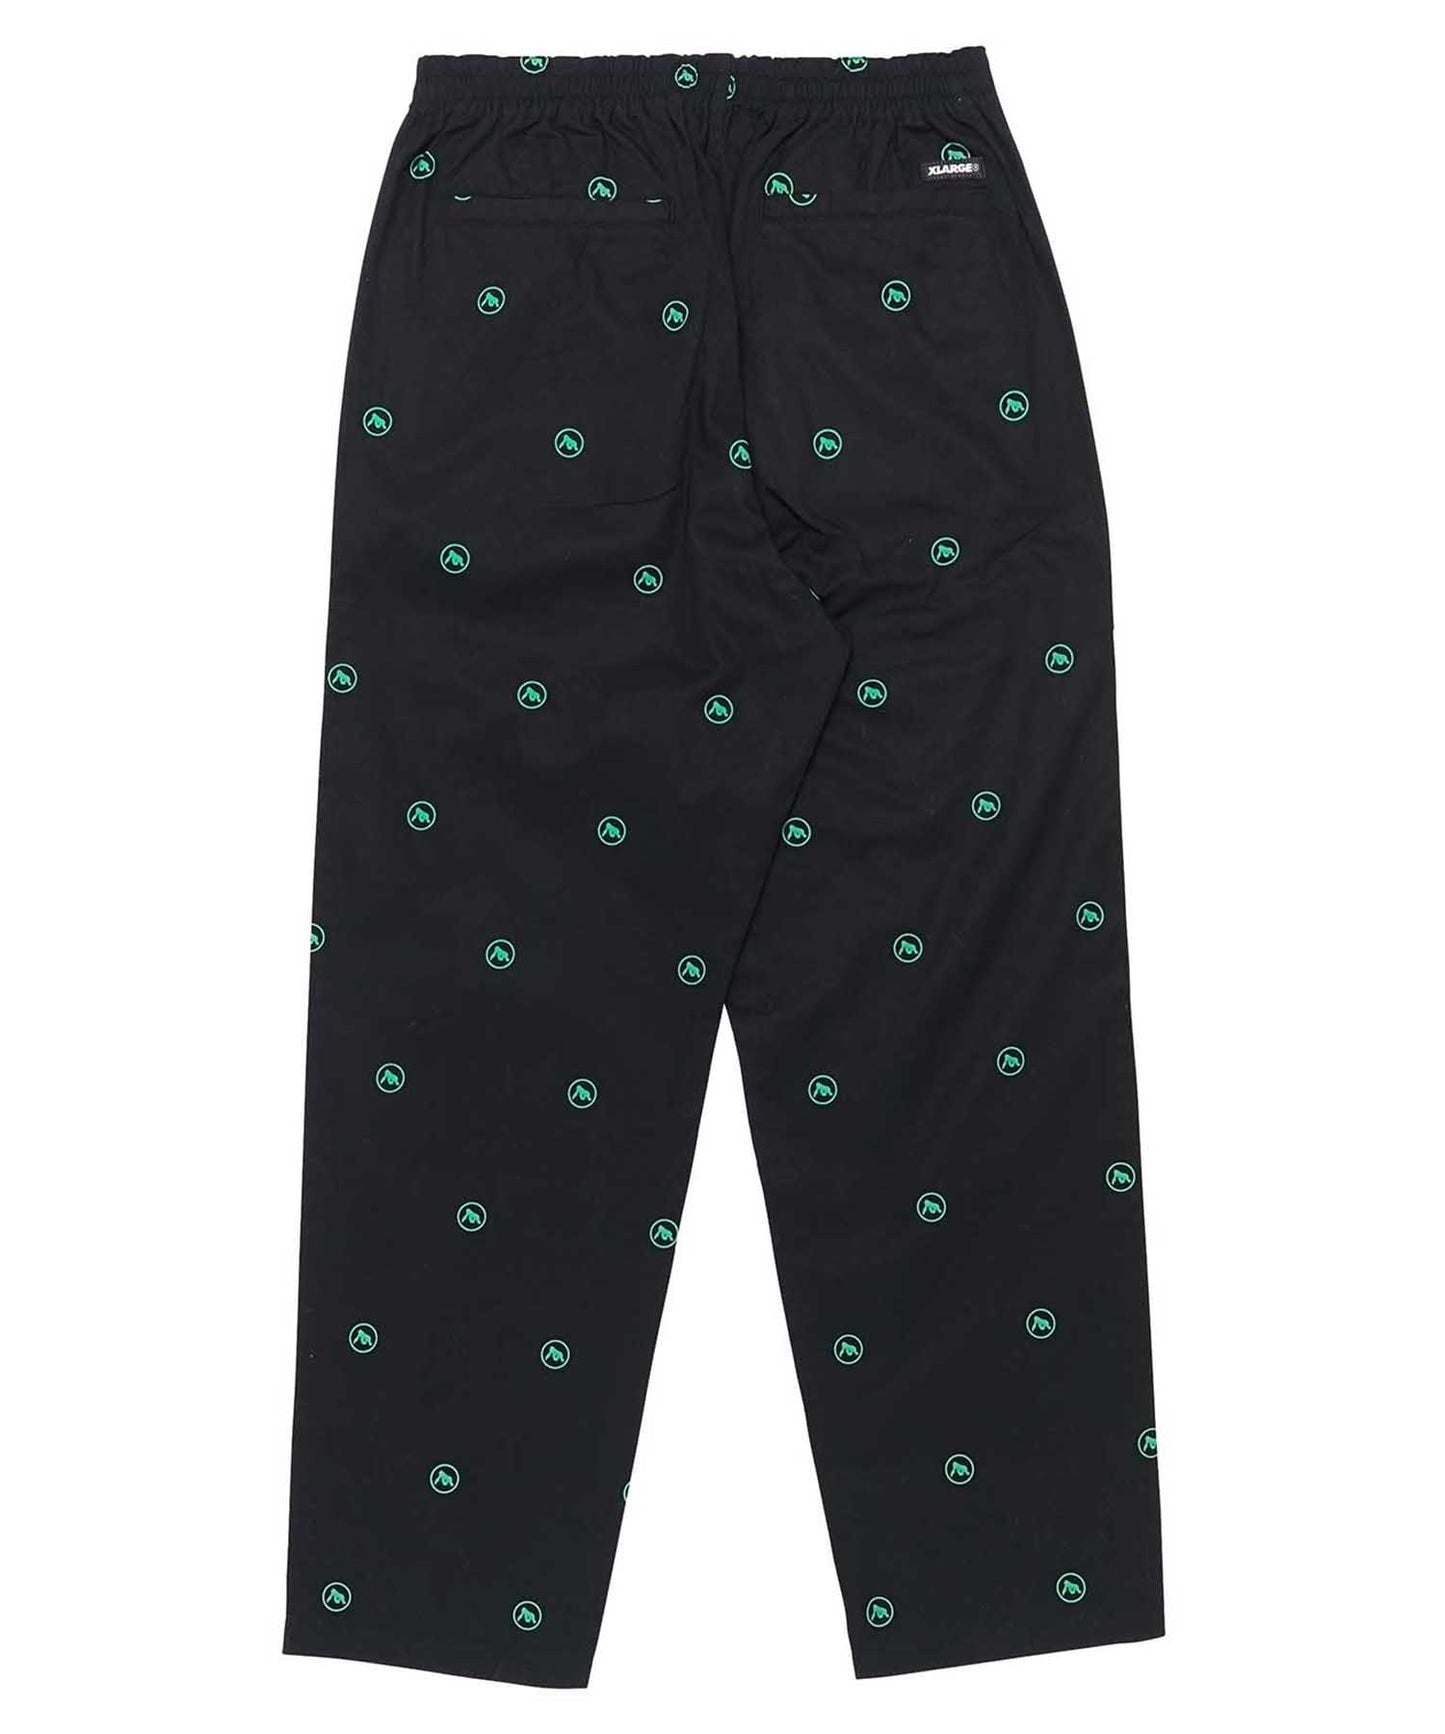 ALLOVER PRINTED LIGHT EASY TYPE PANTS PANTS XLARGE  